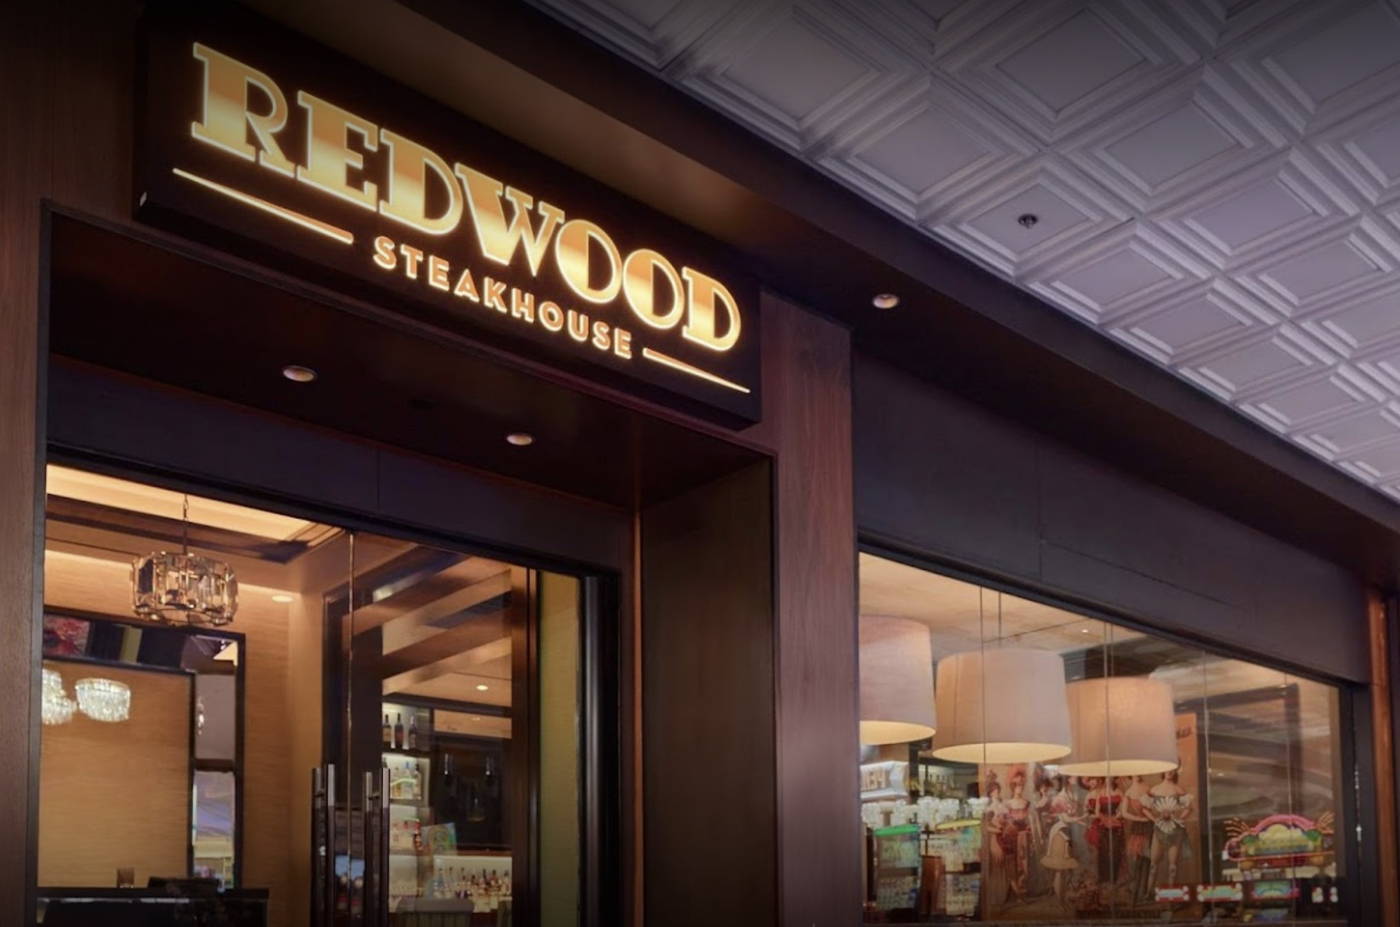 Redwood Steakhouse at California Hotel and Casino Las Vegas